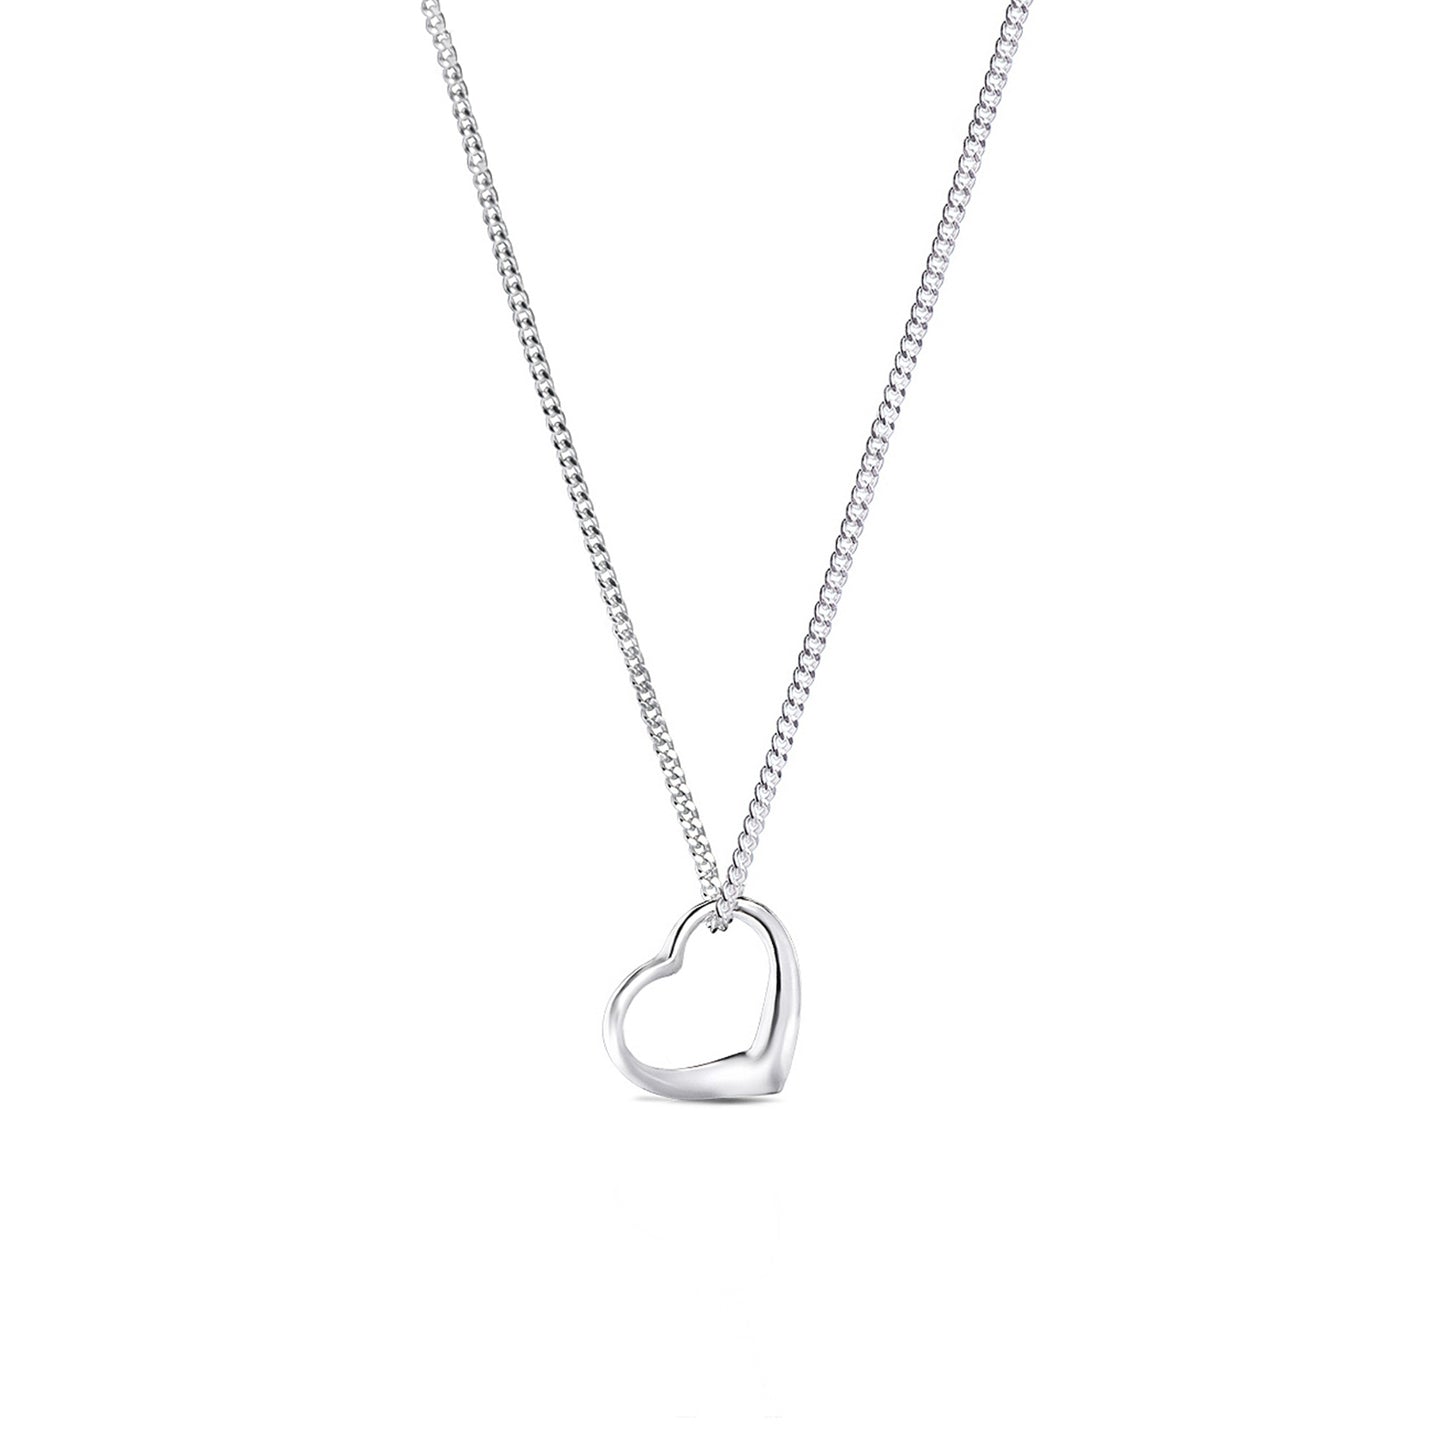 Sterling Silver Floating Heart Pendant Necklace on 16"/41cm Curb Chain - 10mm